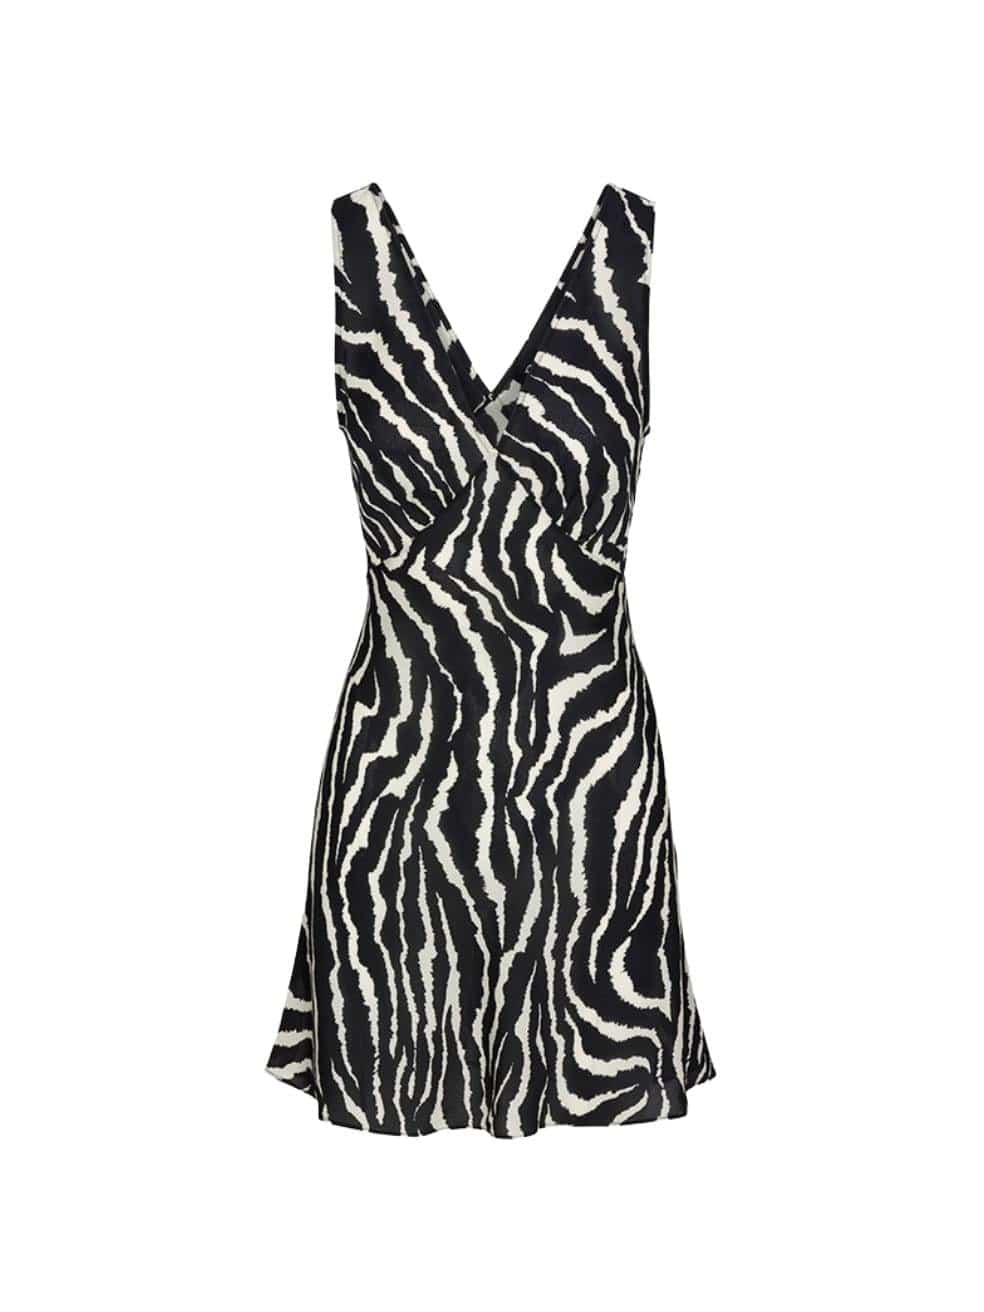 Isabelli Dress in Animal